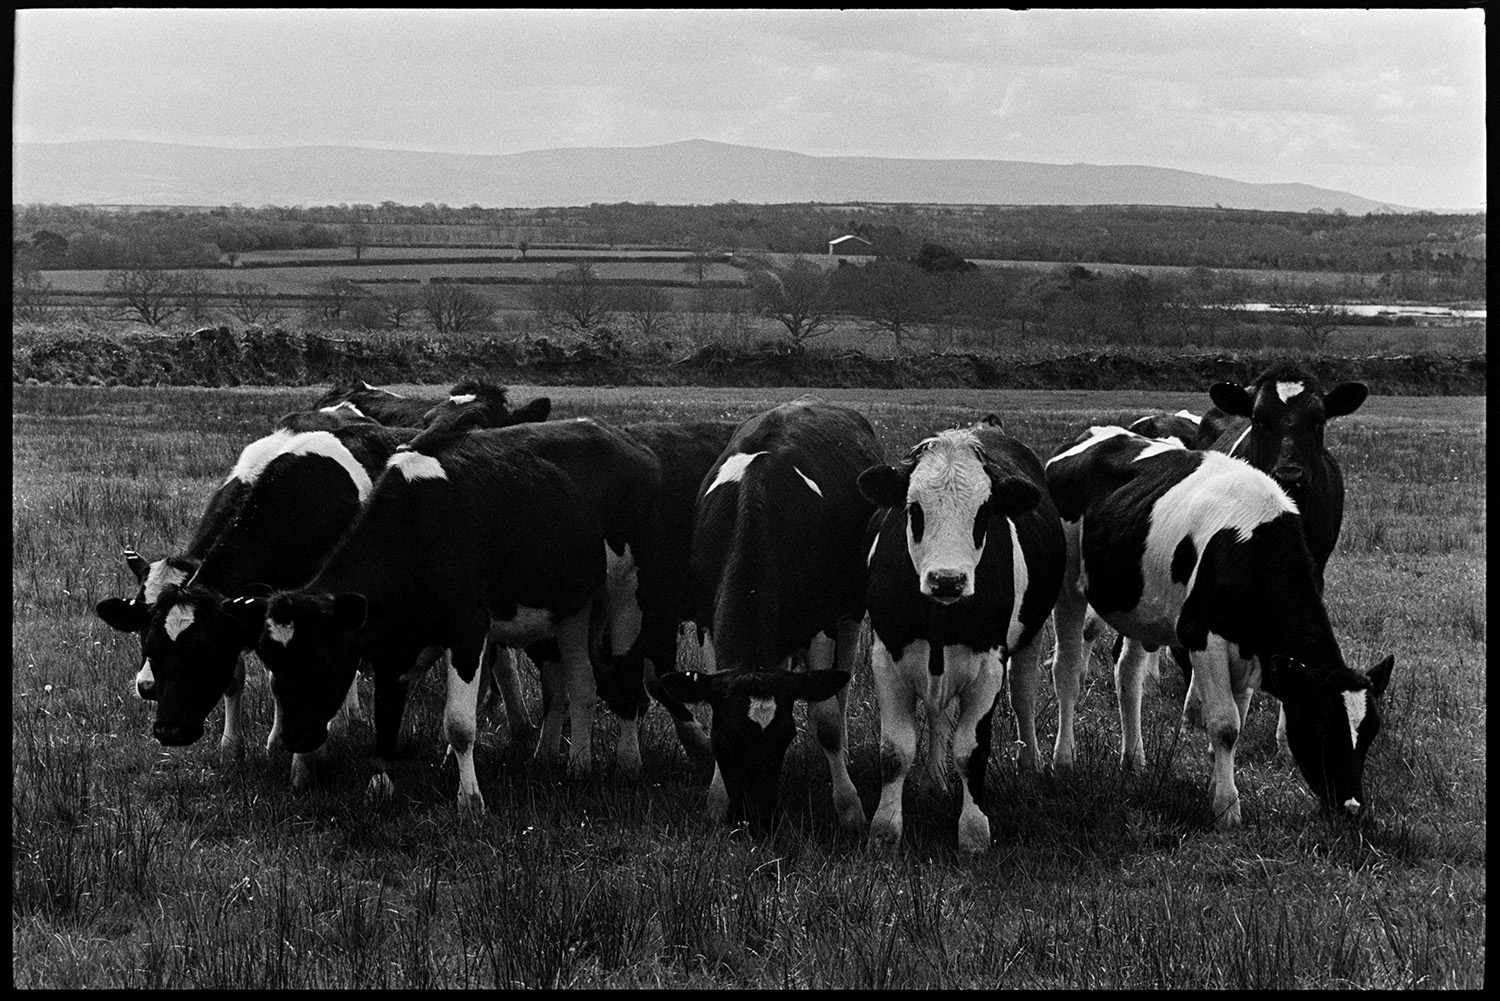 Cows, Bullocks on moor. 
[A small herd of young bullocks grazing on Hollocombe Moor. A landscape of trees, hedges and fields can be seen in the background.]